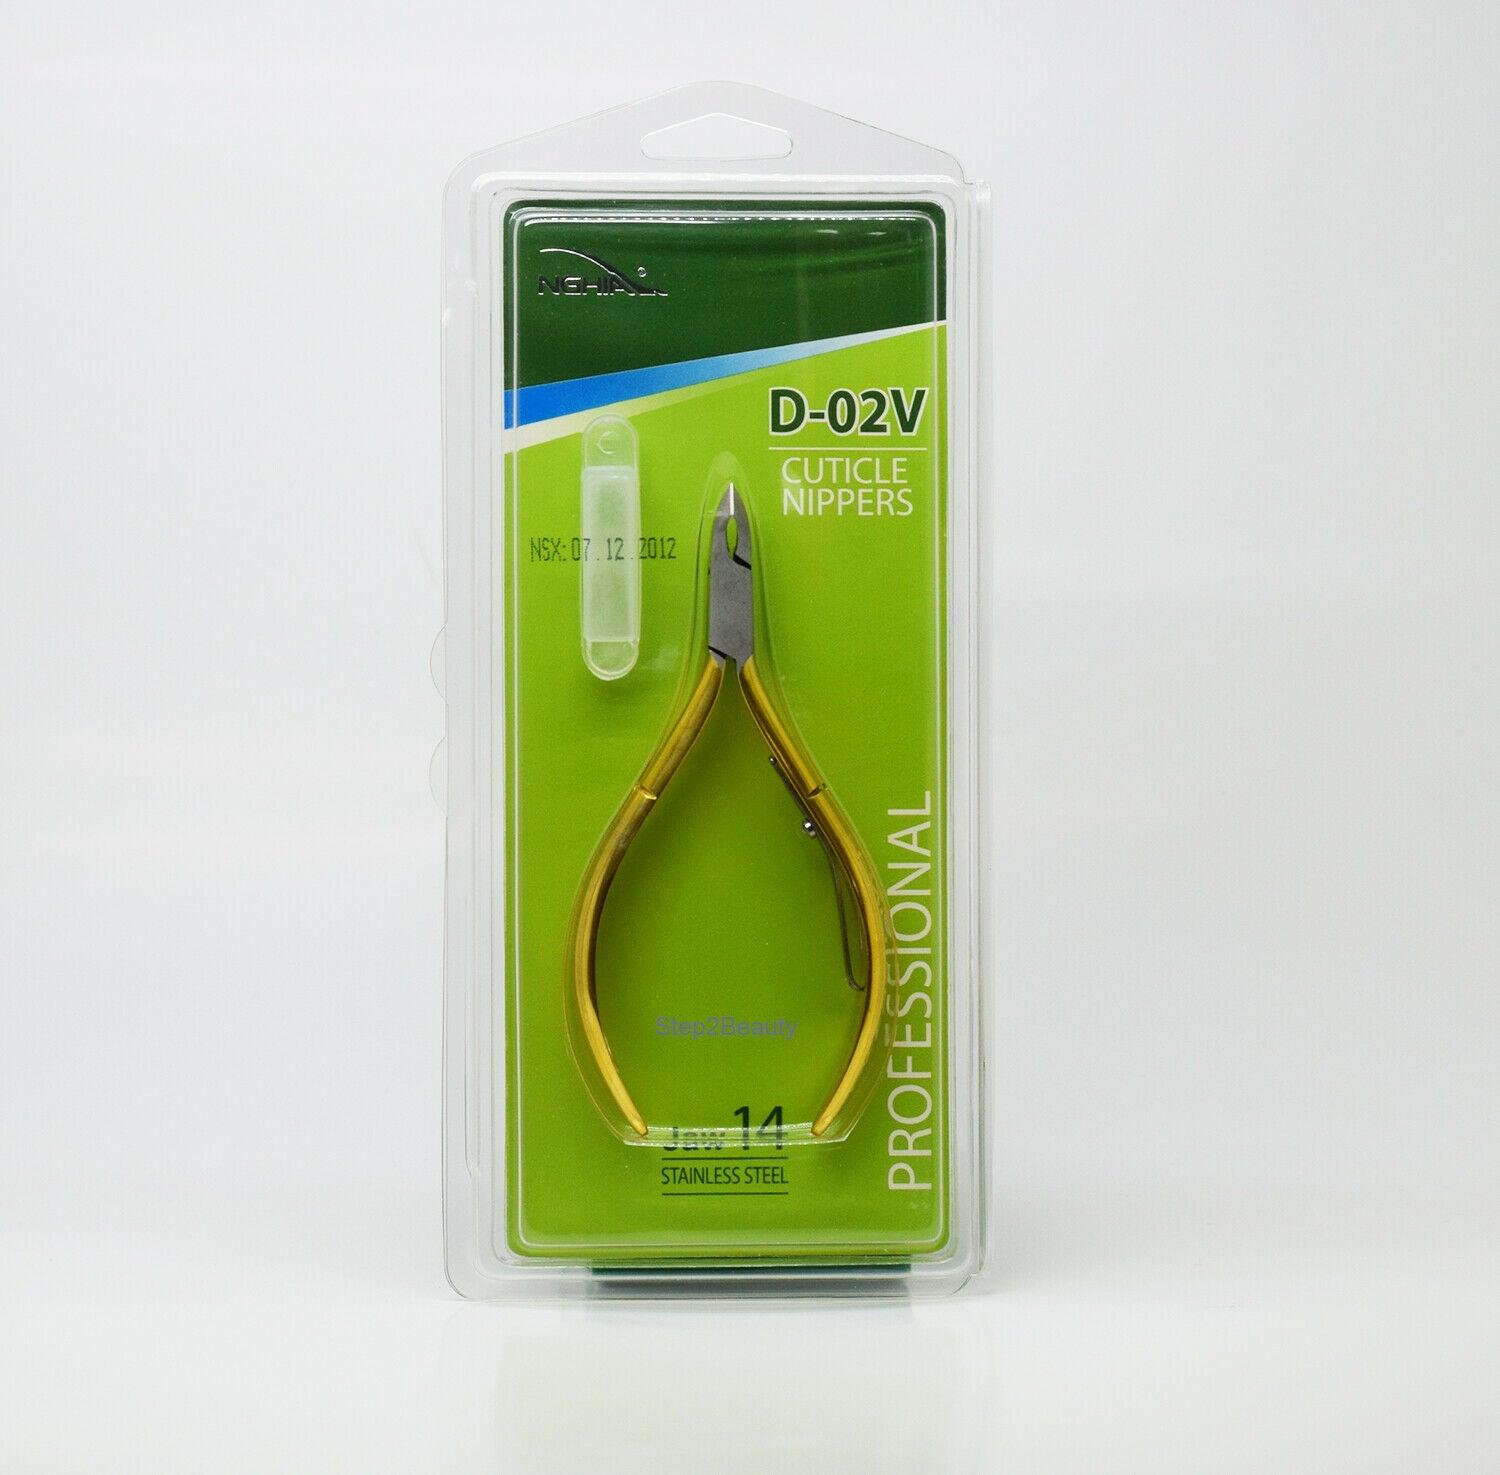 Nghia Stainless Steel Cuticle Nippers D-02V Jaw 14